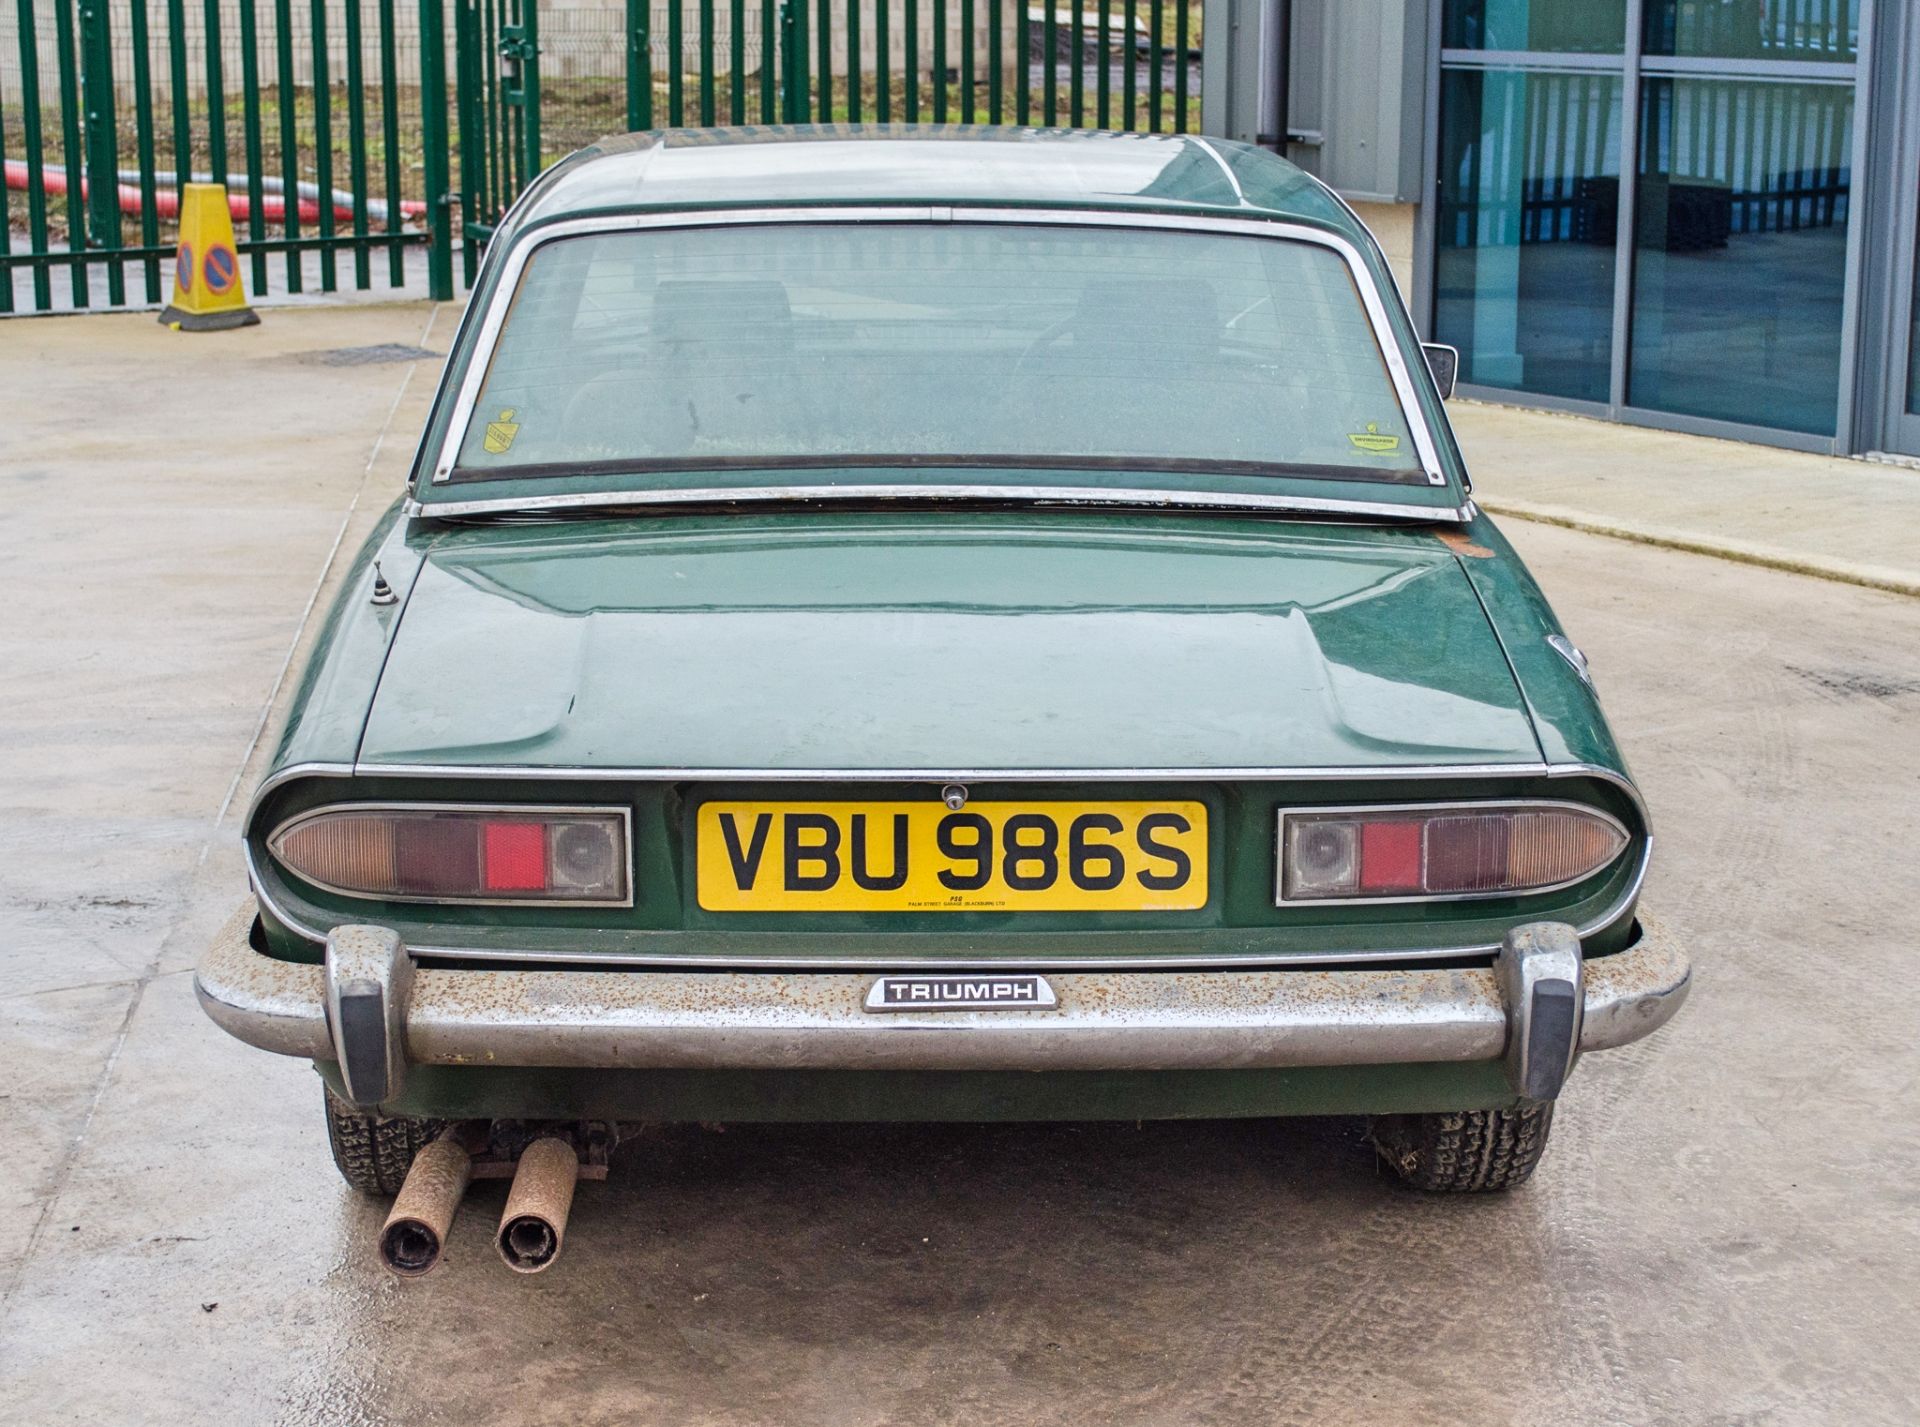 1978 Triumph Stag 3 litre manual 2 door convertible Barn Find - Image 12 of 57